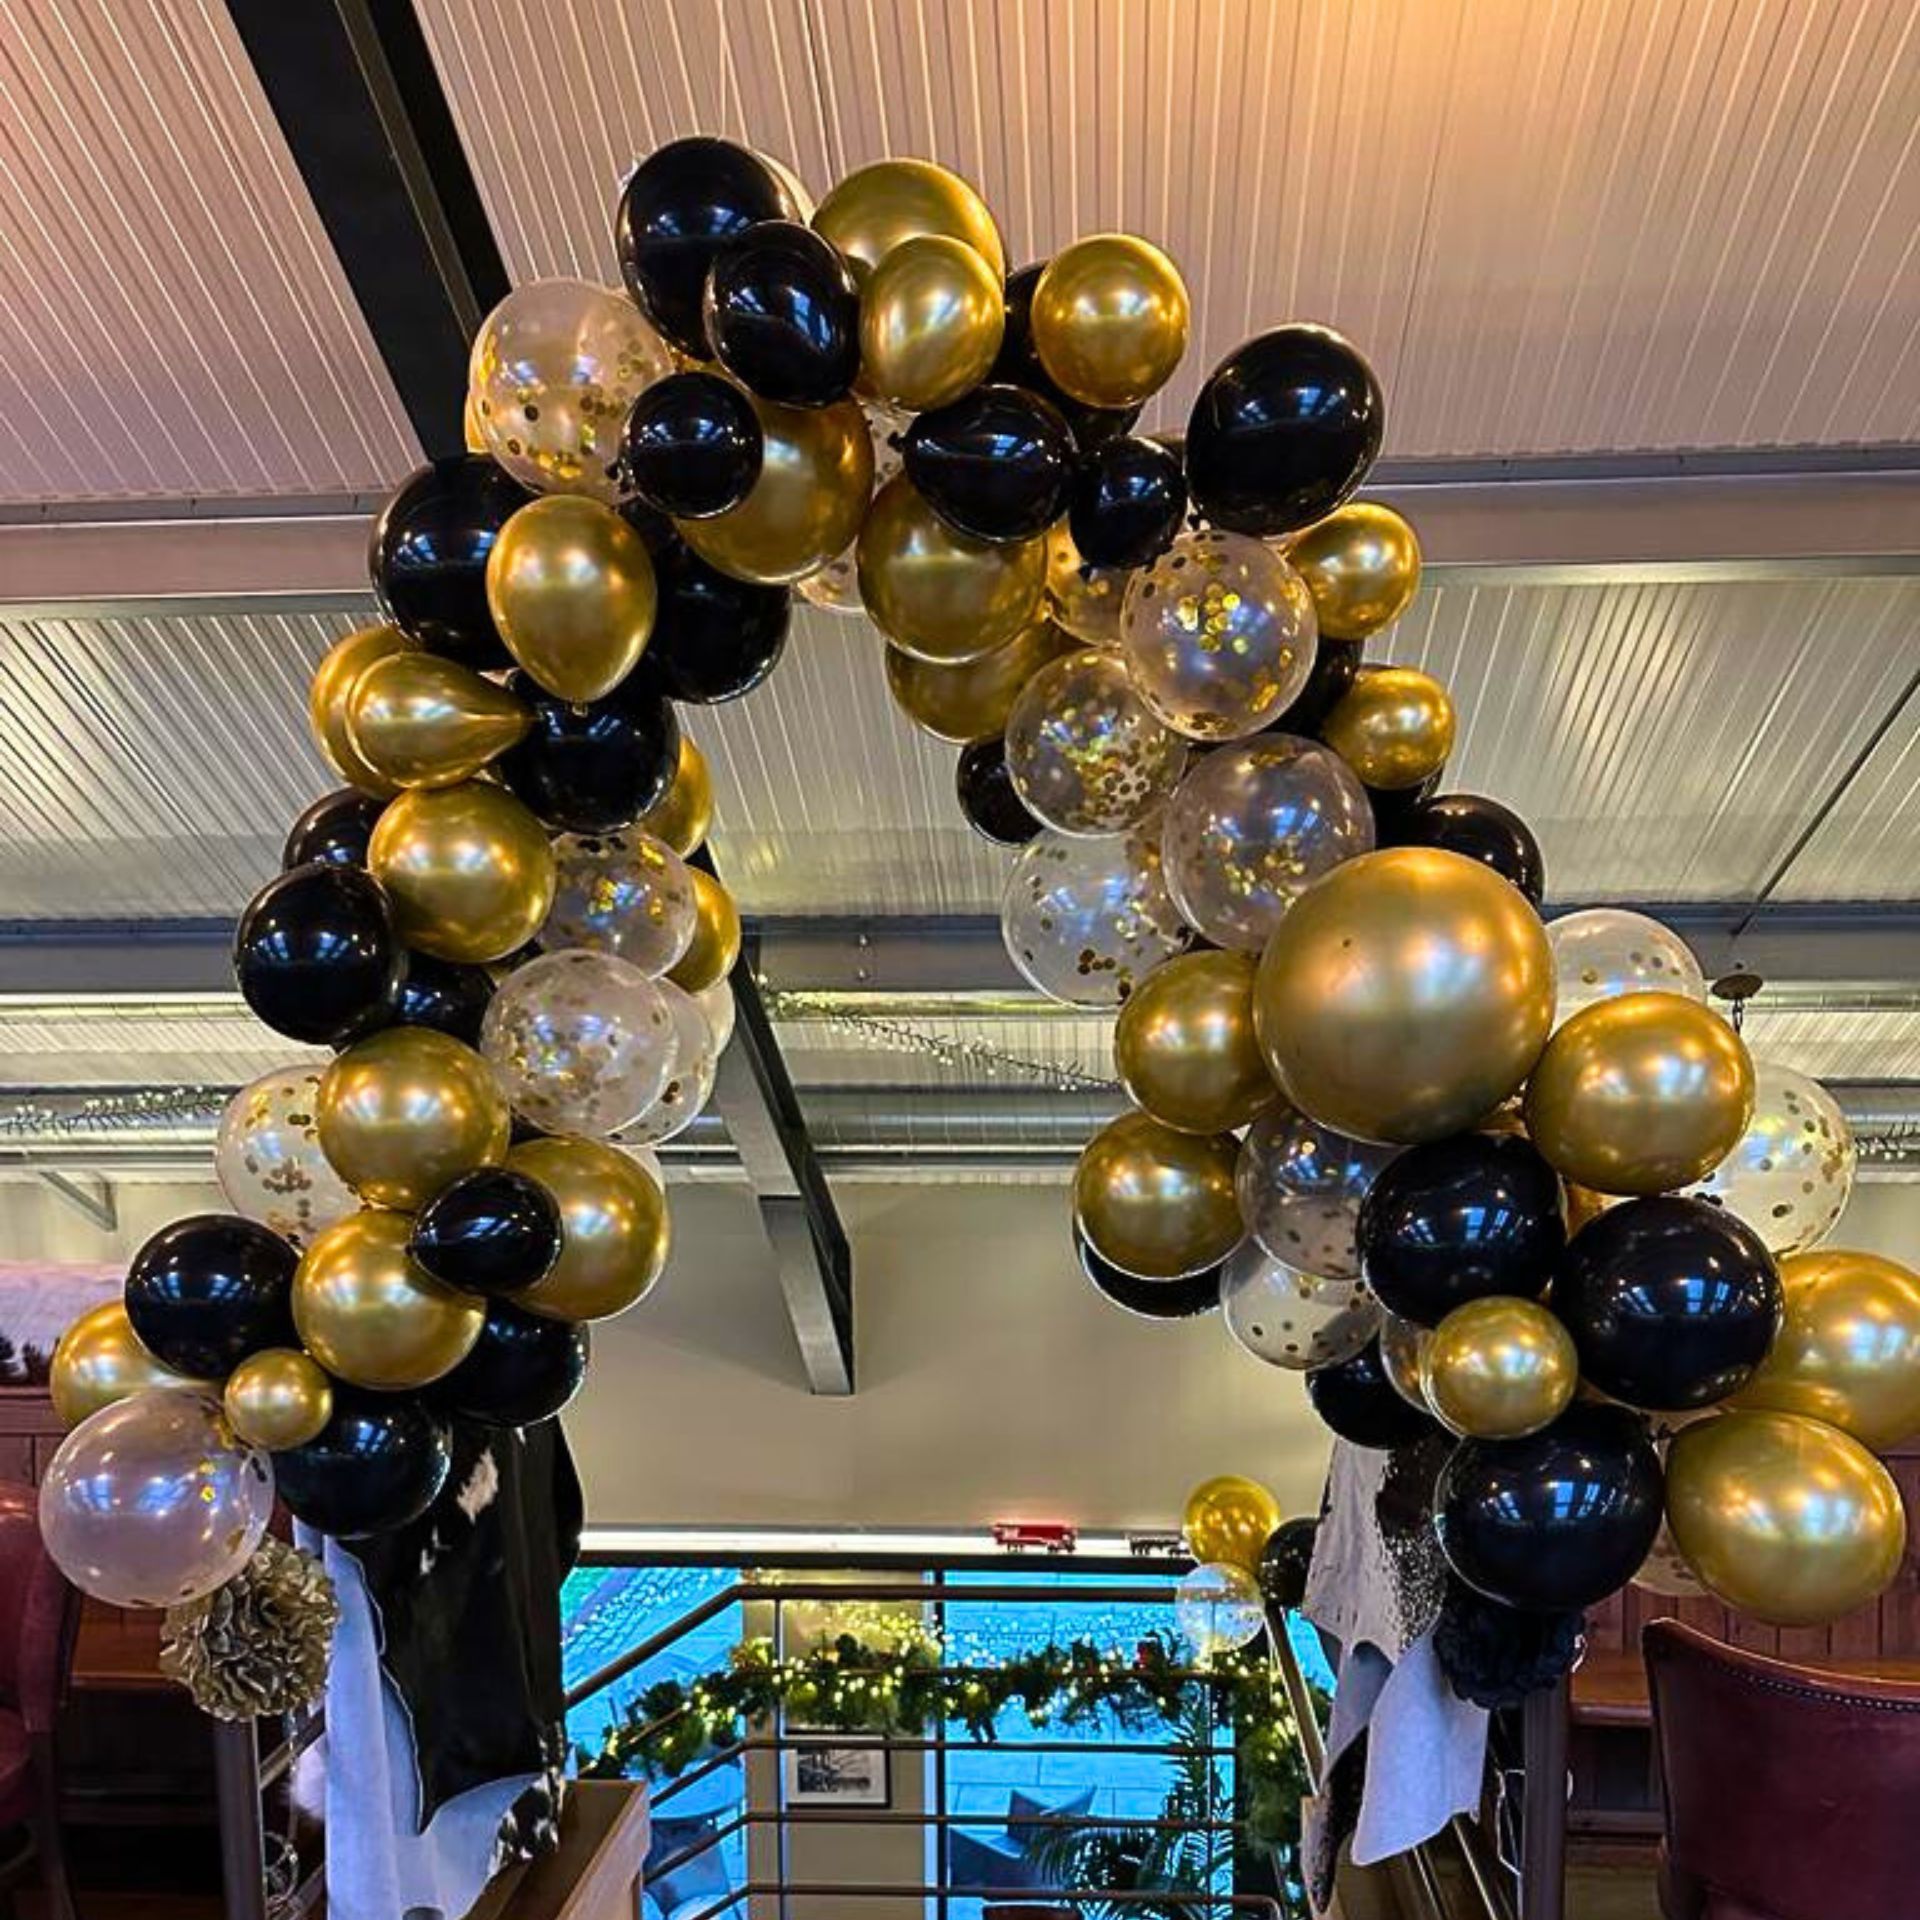 A balloon arch for a party